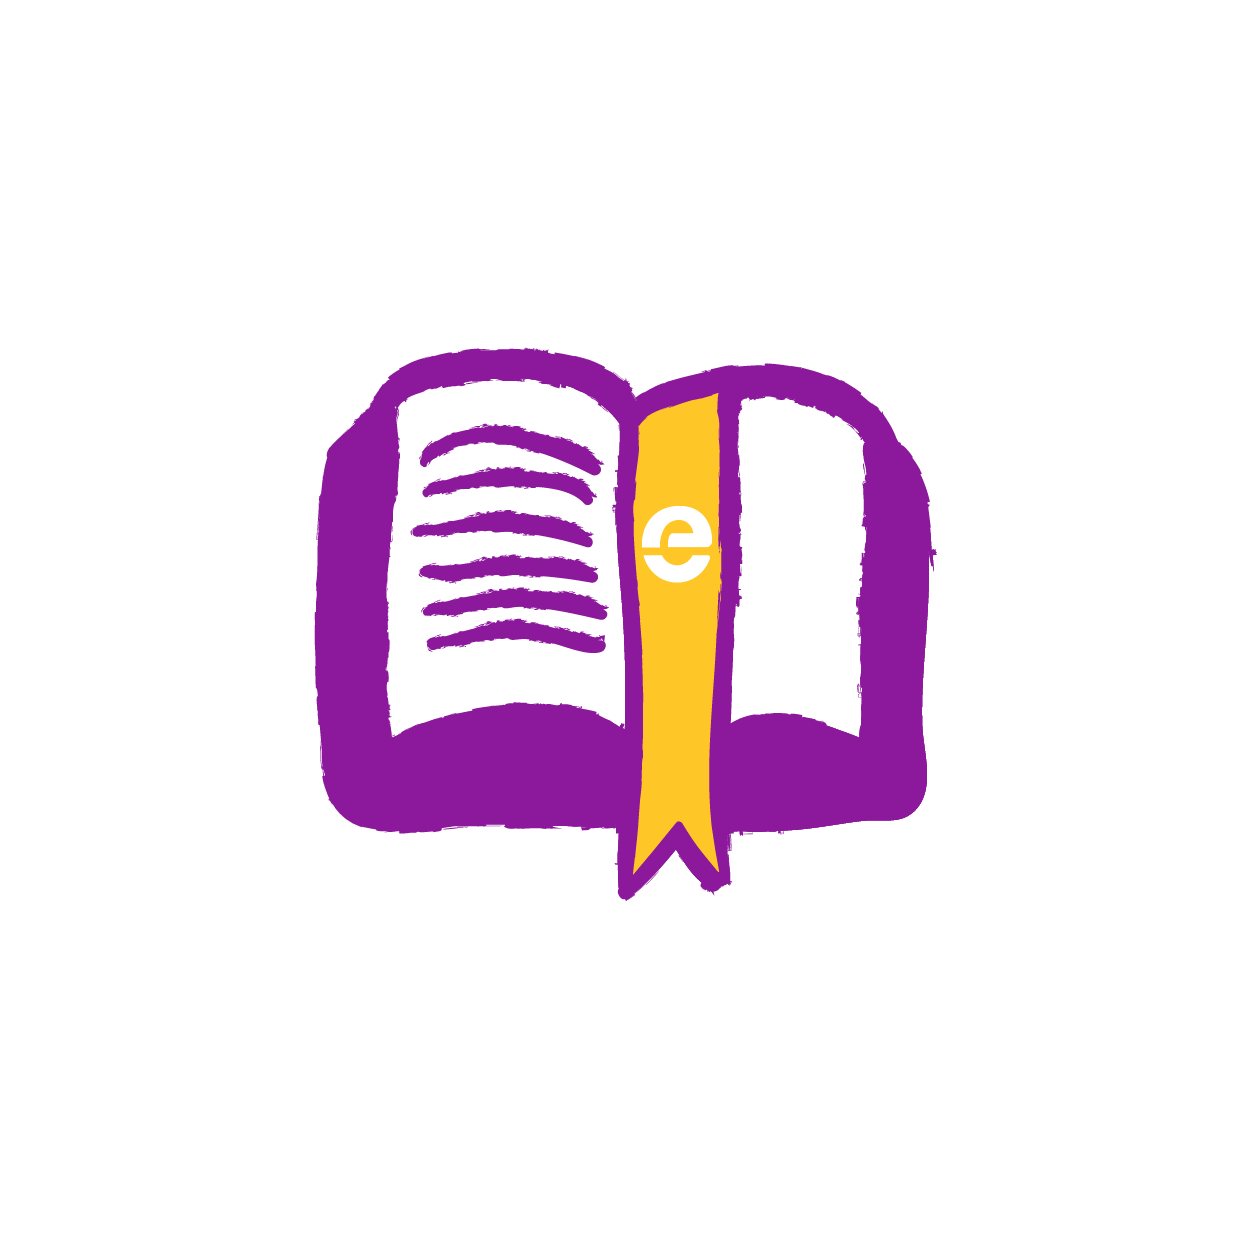 AMF_Icongraphy_White_eSmart_50%AustralianLibraries2.png